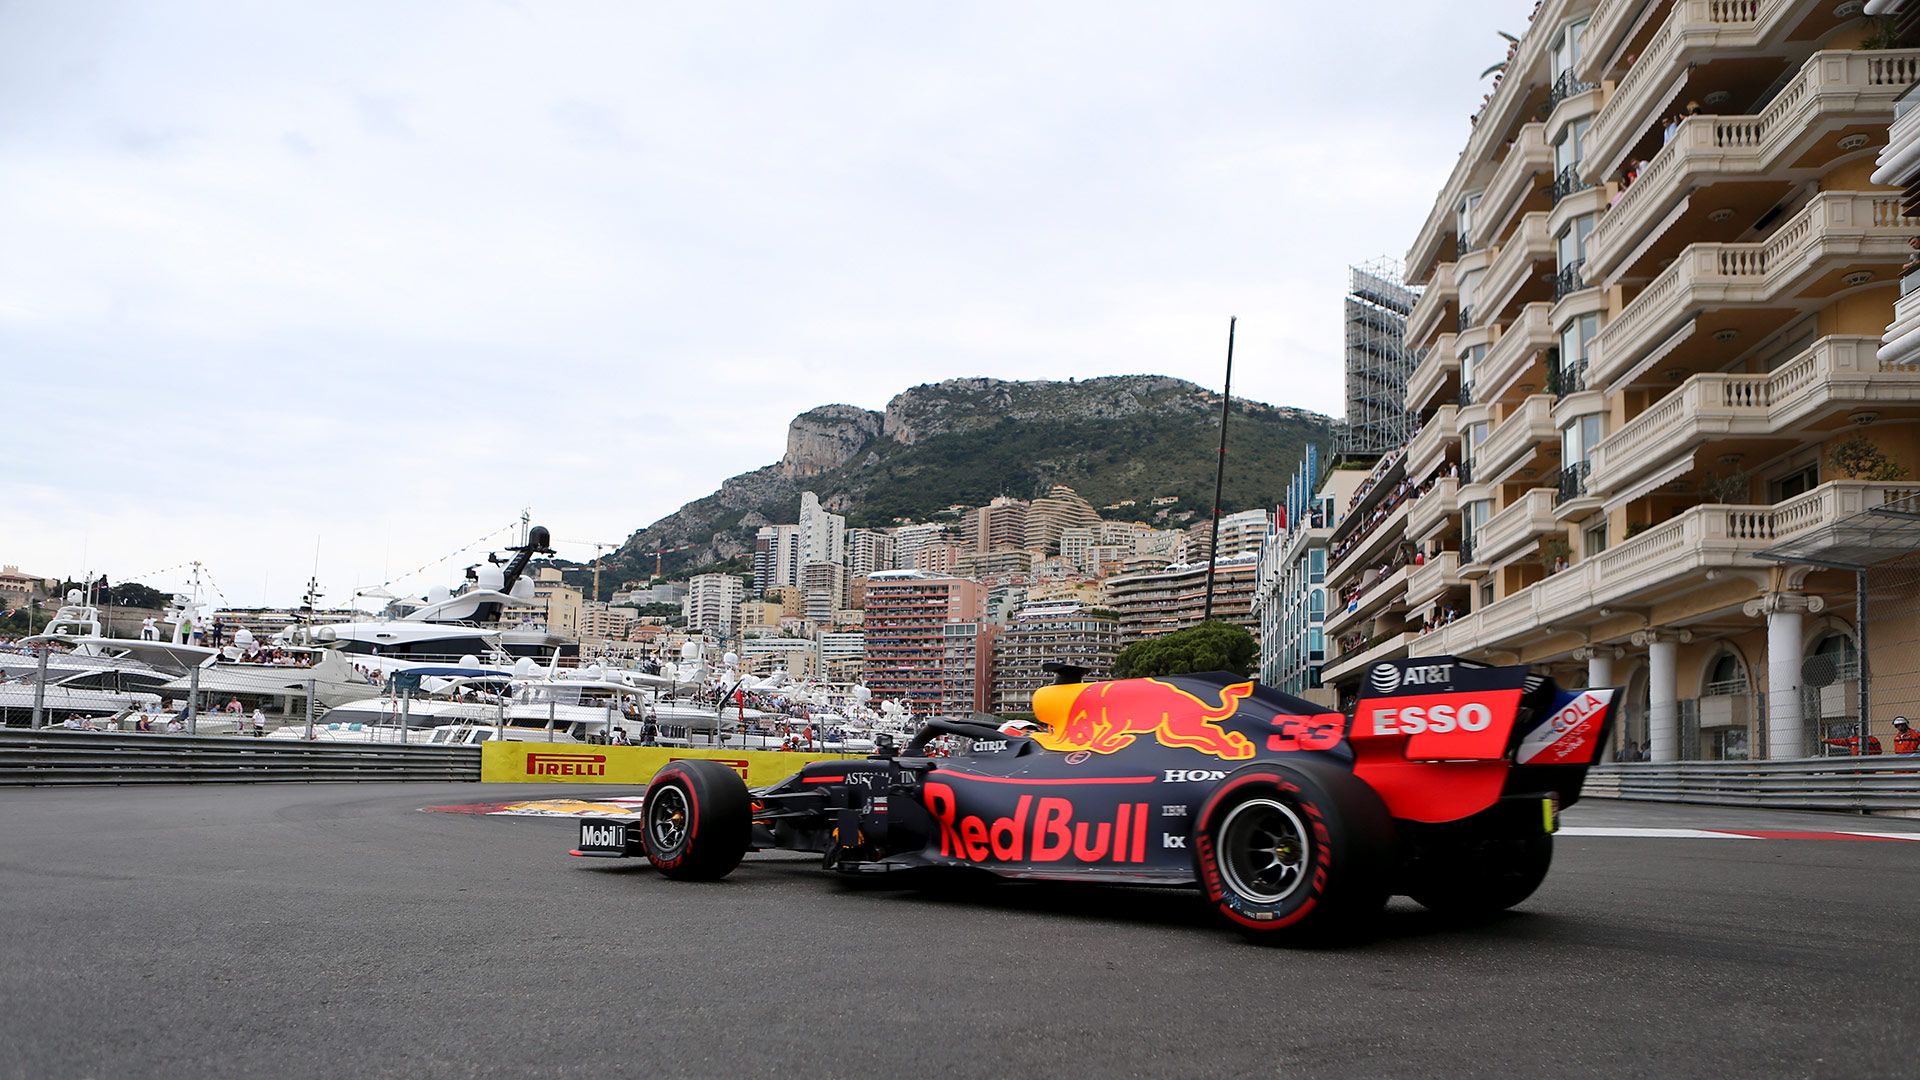 We need to make sure we beat Mercedes in Monaco', says Red Bull boss Christian Horner. Formula 1®